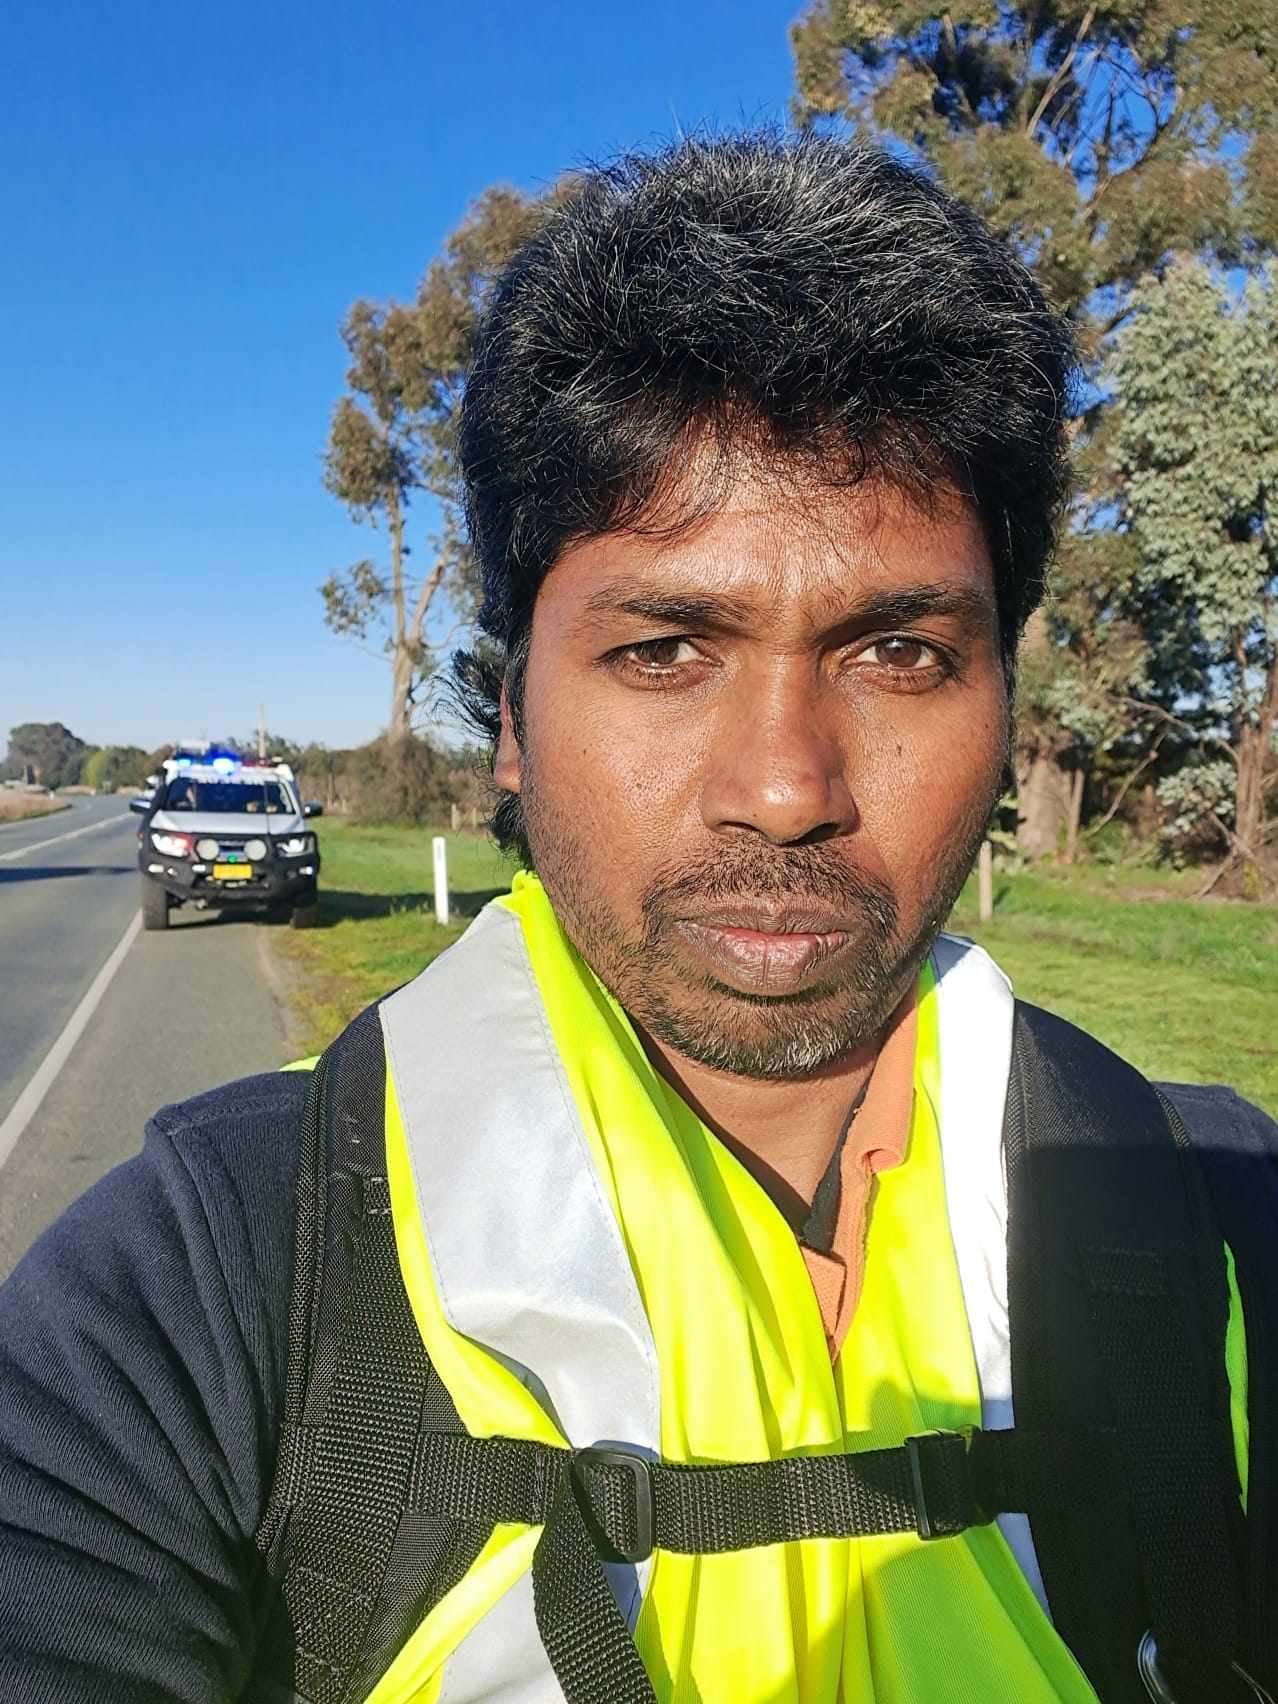 Tamil refugee Neil Para on his 1,000km “Walk for Freedom” to petition Australian Prime Minister Anthony Albanese about his family’s visa-less plight. Photo: Handout/Neil Para